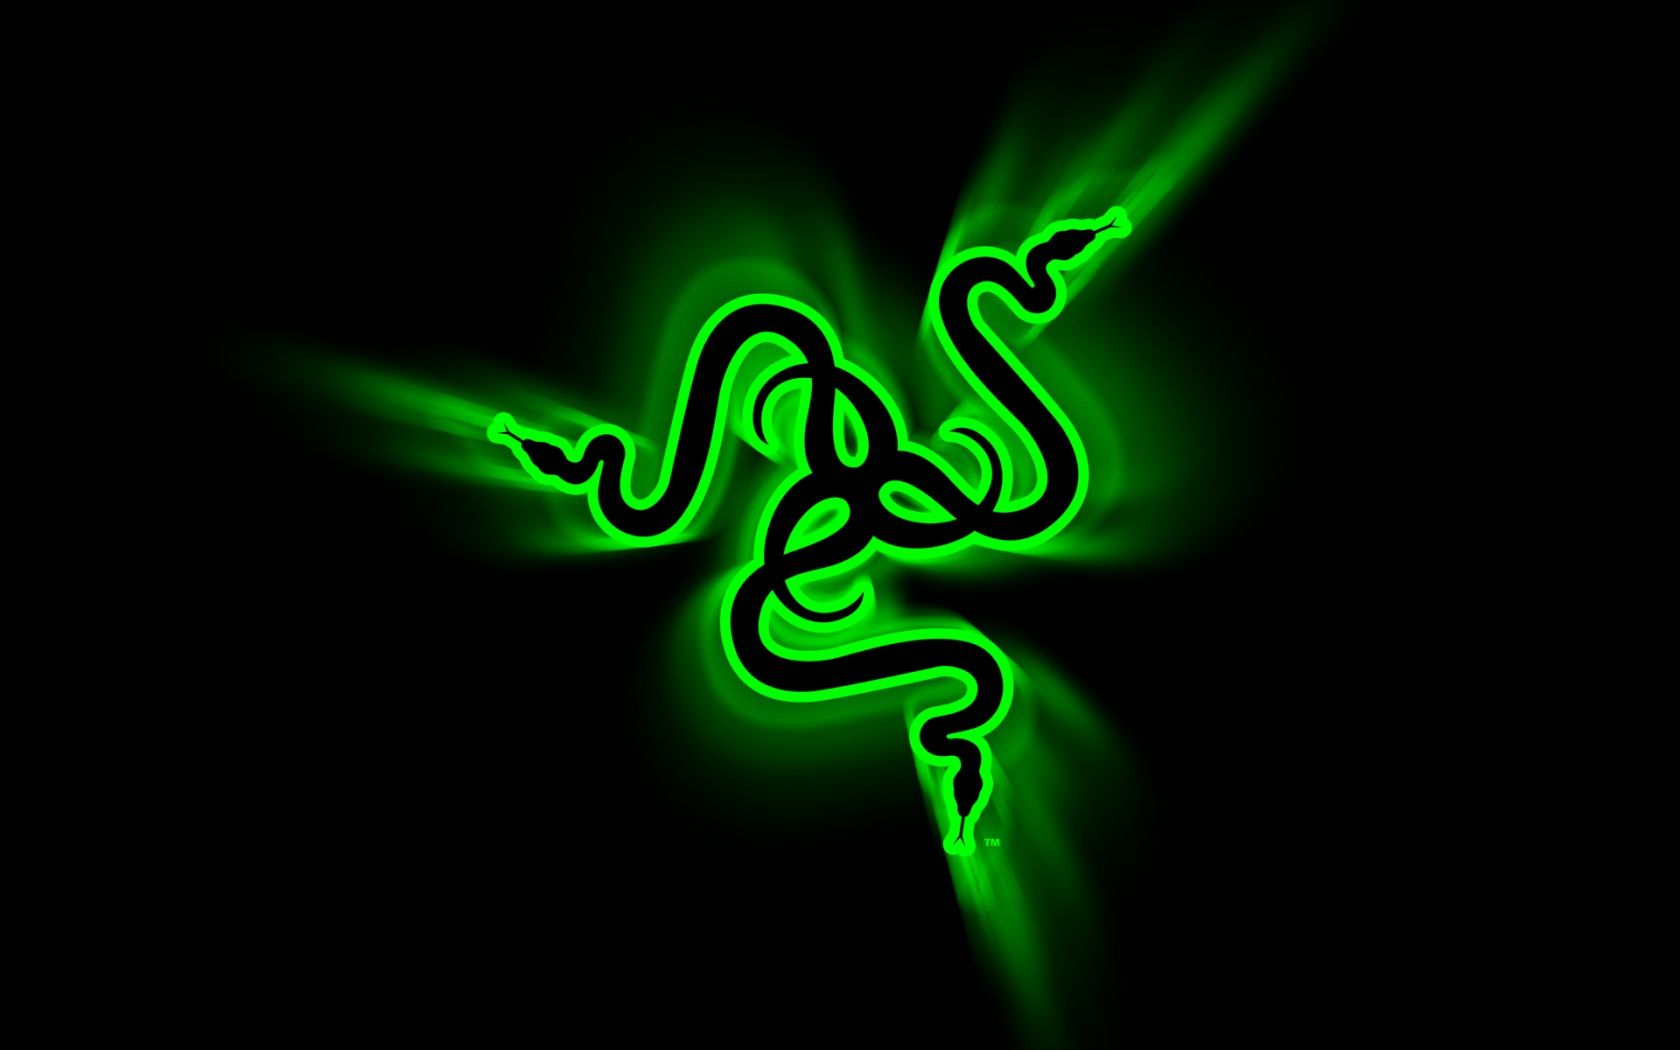 Razer iPhone Wallpaper Image And All To